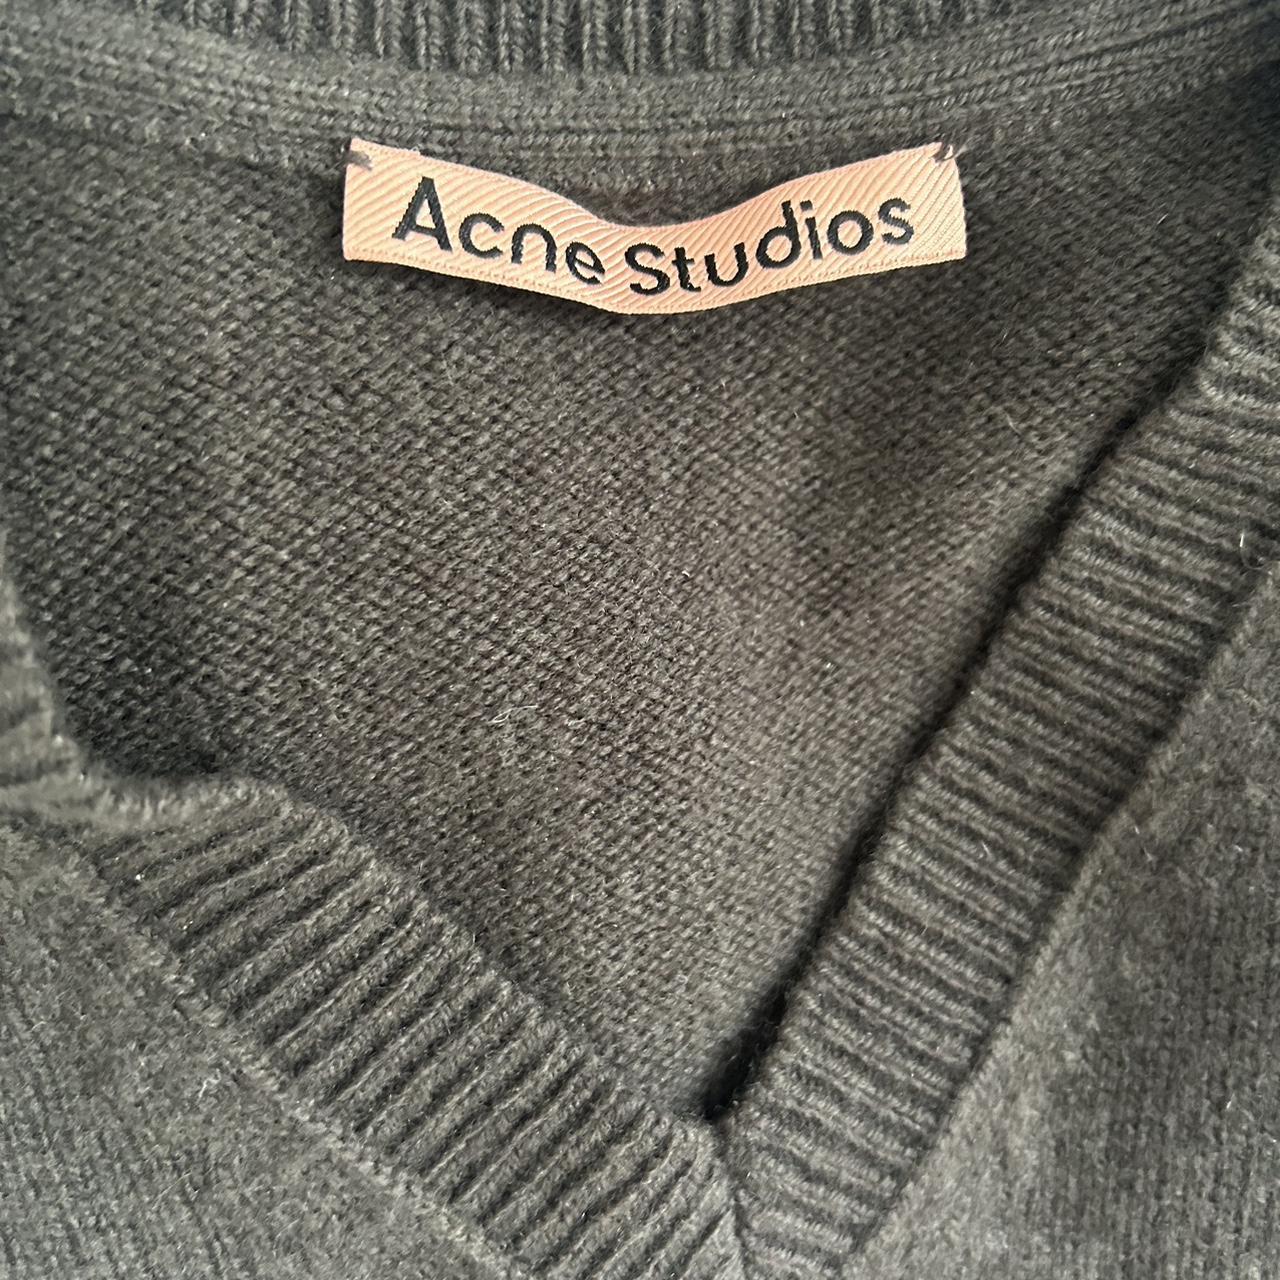 acne studios wool cashmere sweater size m but fits... - Depop